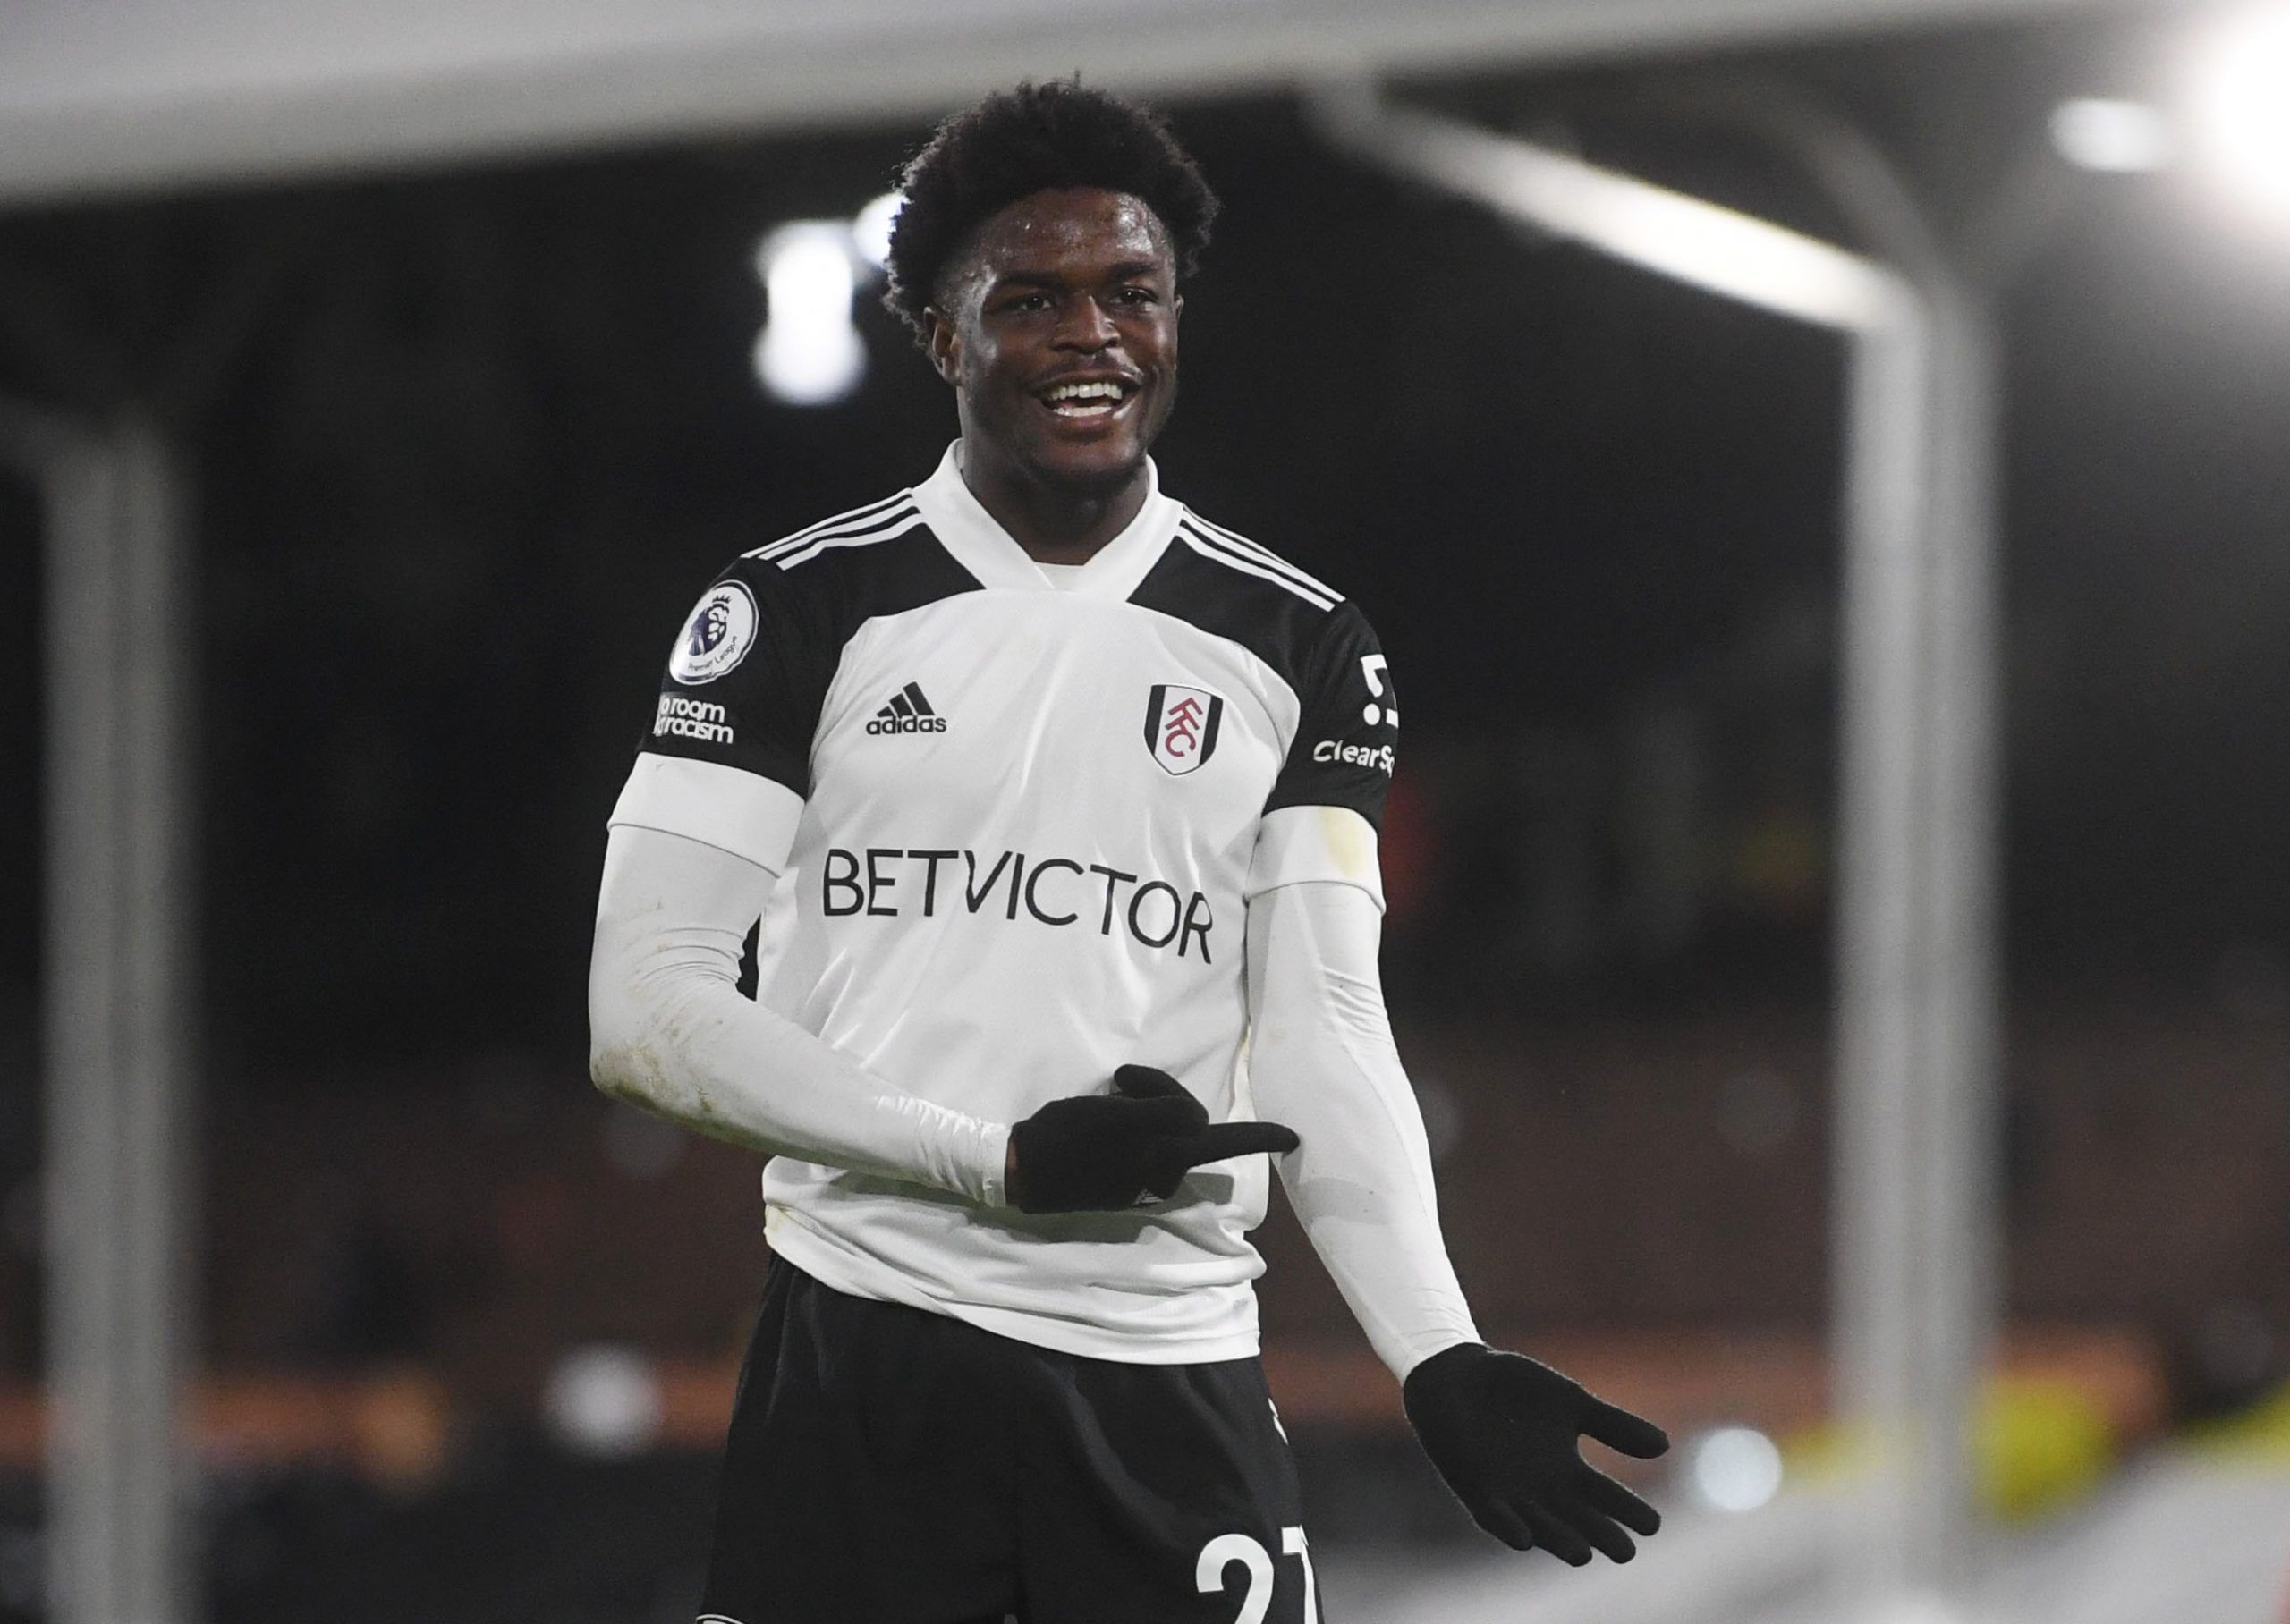 Soccer Football - Premier League - Fulham v Tottenham Hotspur - Craven Cottage, London, Britain - March 4, 2021 Fulham's Josh Maja celebrates scoring a goal before it is disallowed following a referral to VAR Pool via REUTERS/Neil Hall EDITORIAL USE ONLY. No use with unauthorized audio, video, data, fixture lists, club/league logos or 'live' services. Online in-match use limited to 75 images, no video emulation. No use in betting, games or single club /league/player publications.  Please contact